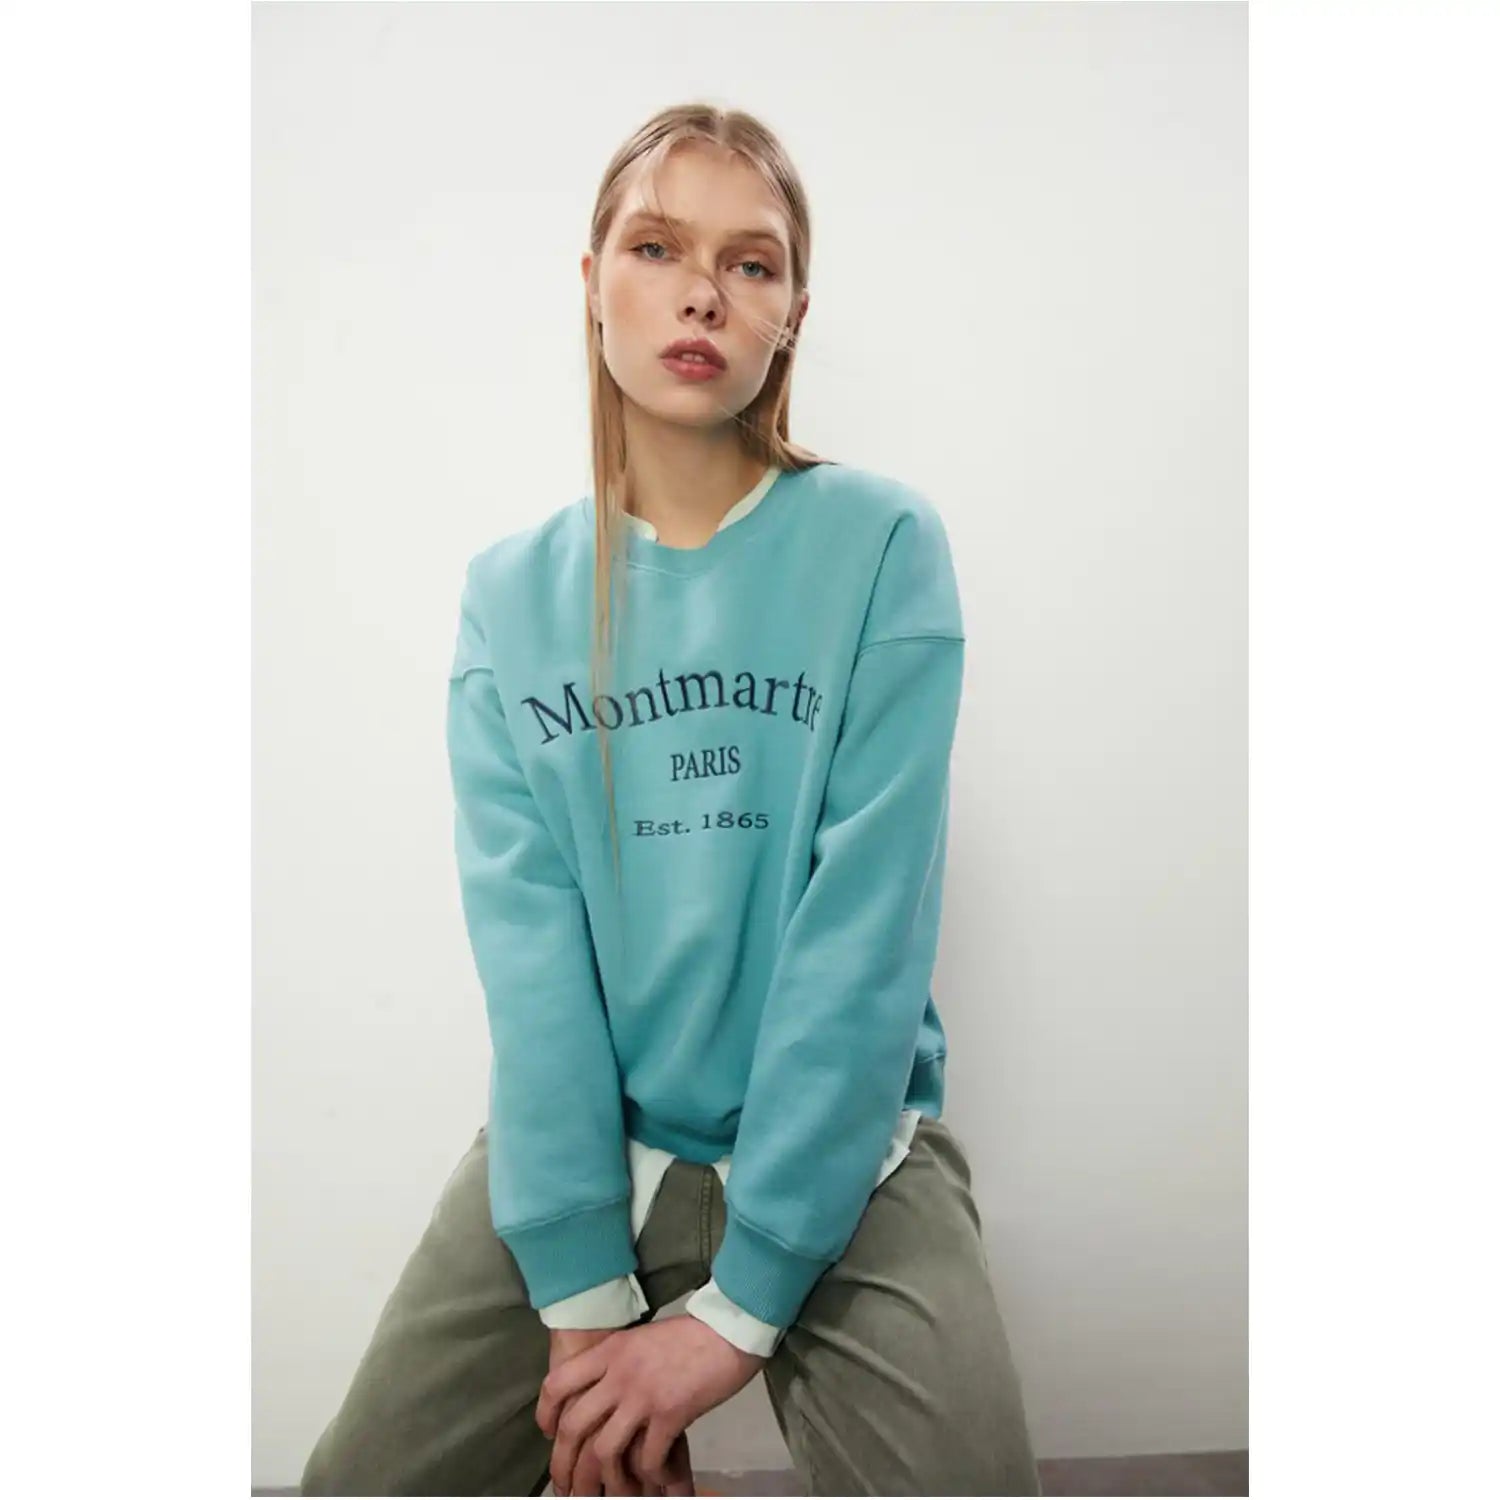 Sfera Embroidered Sweatshirt - Teal 2 Shaws Department Stores